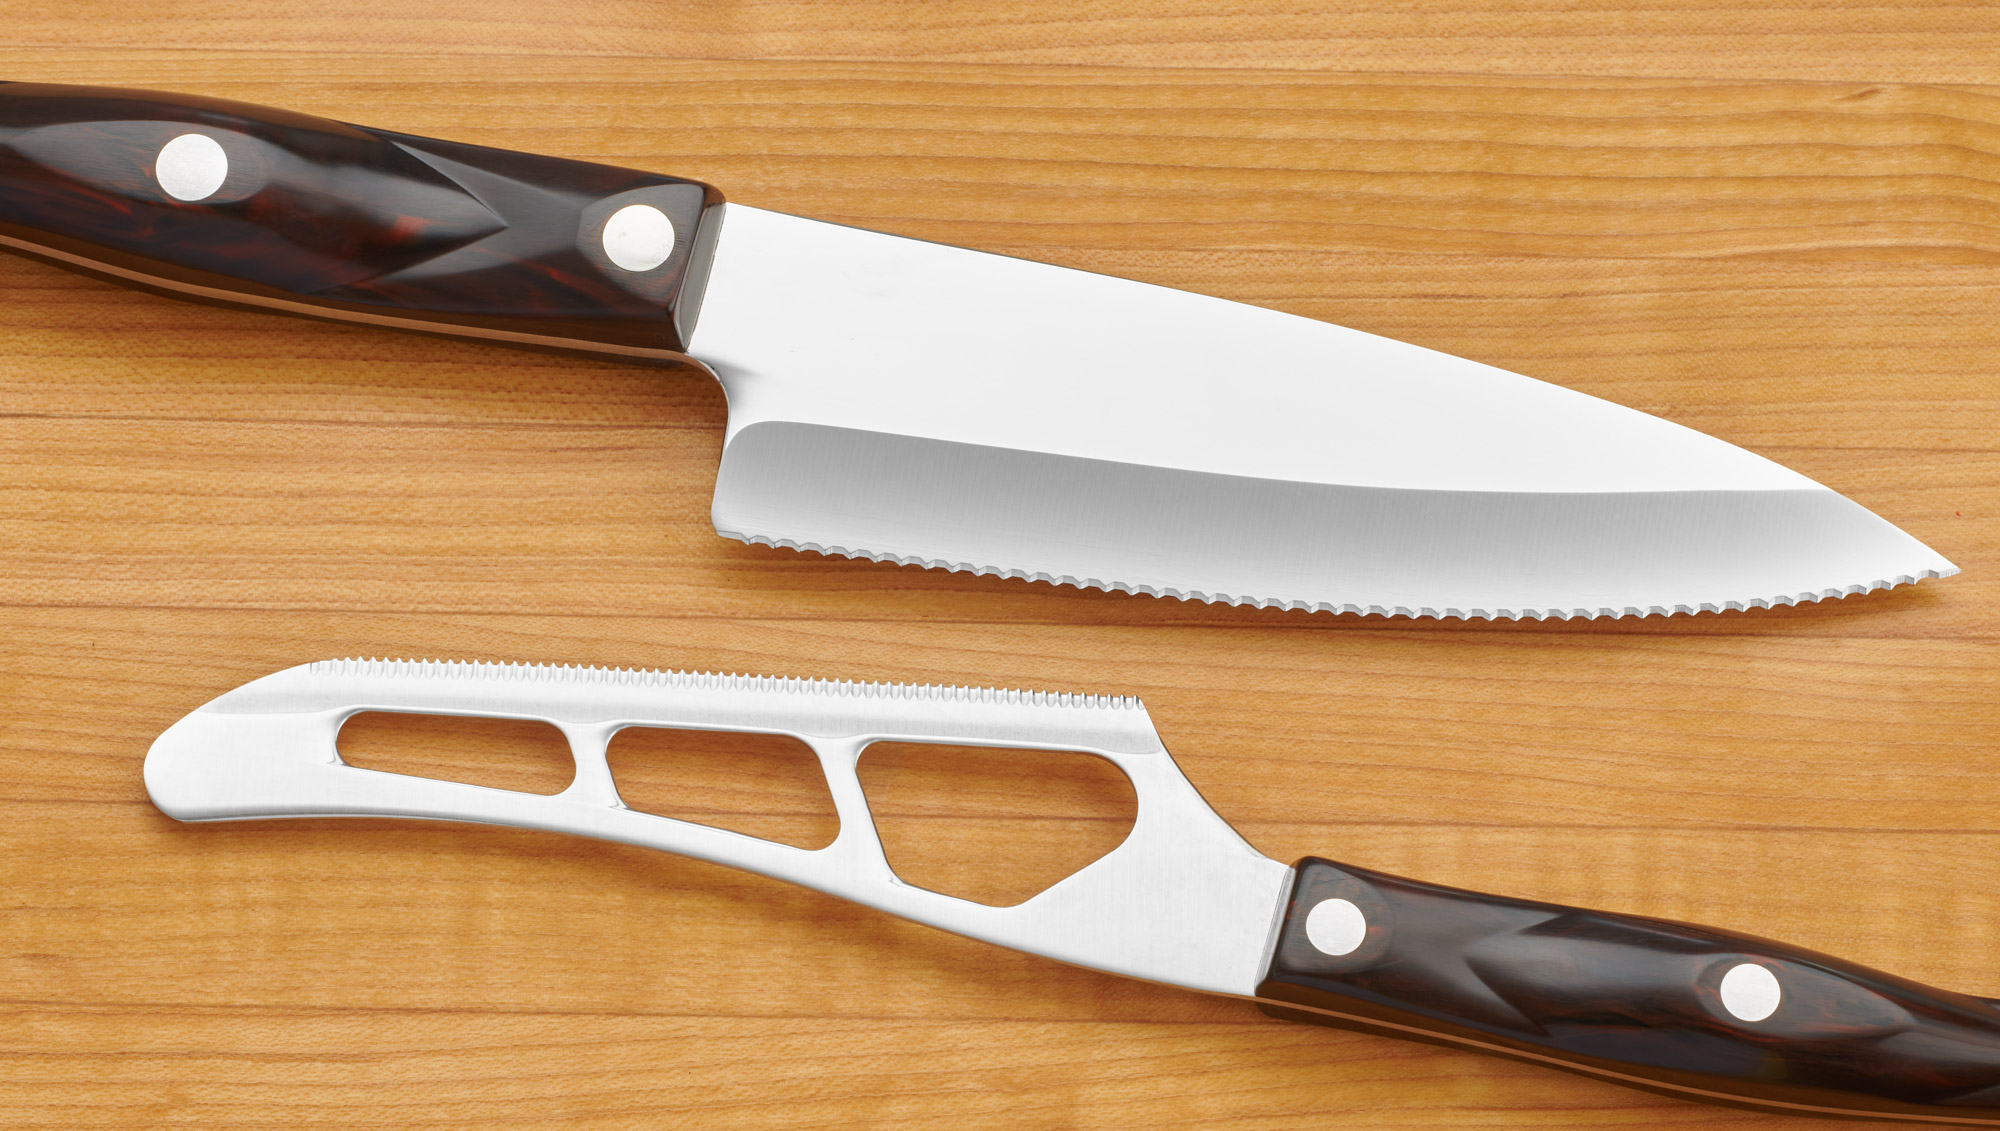 5 Simple Tips To Take Care Of Kitchen Knives